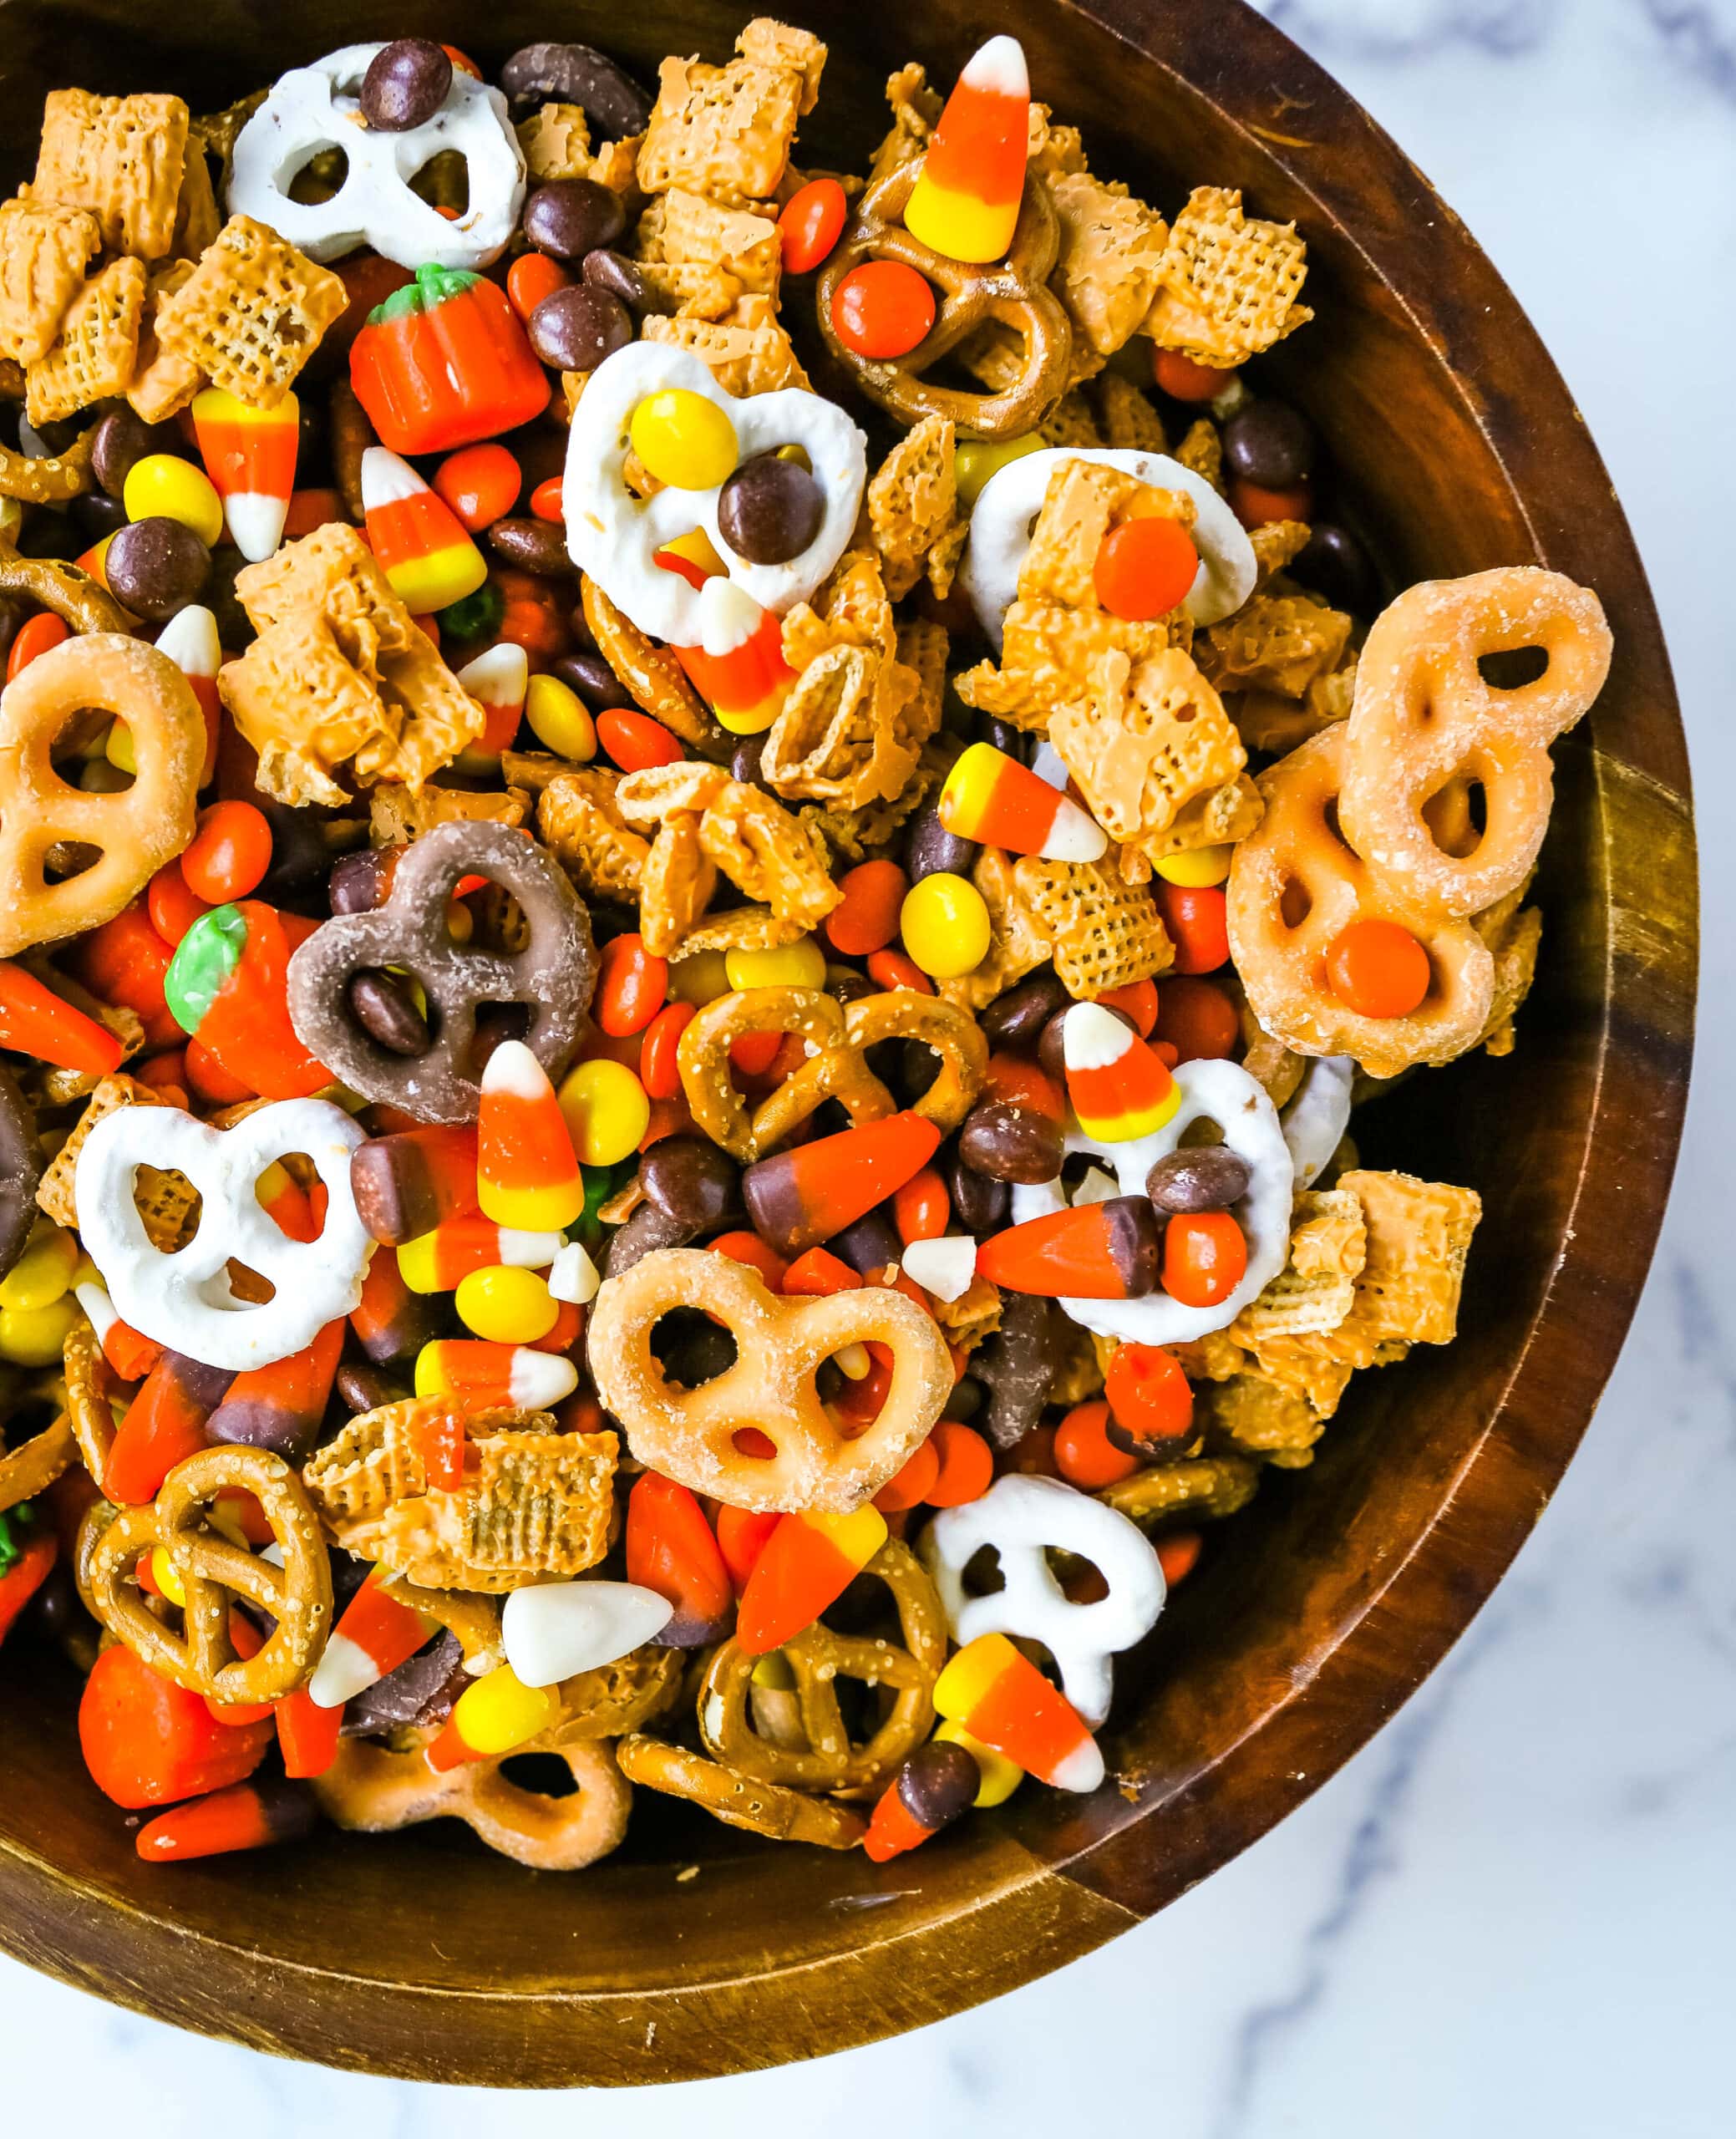 This Halloween Sweet and Salty Snack Mix is made with salty pretzels, butterscotch-tossed Chex cereal, candy corn, Reese's Pieces, and chocolate-covered pretzels. You can even add in some salty peanuts or caramel corn for a more salty and sweet combination. This is the perfect Fall sweet snack mix.